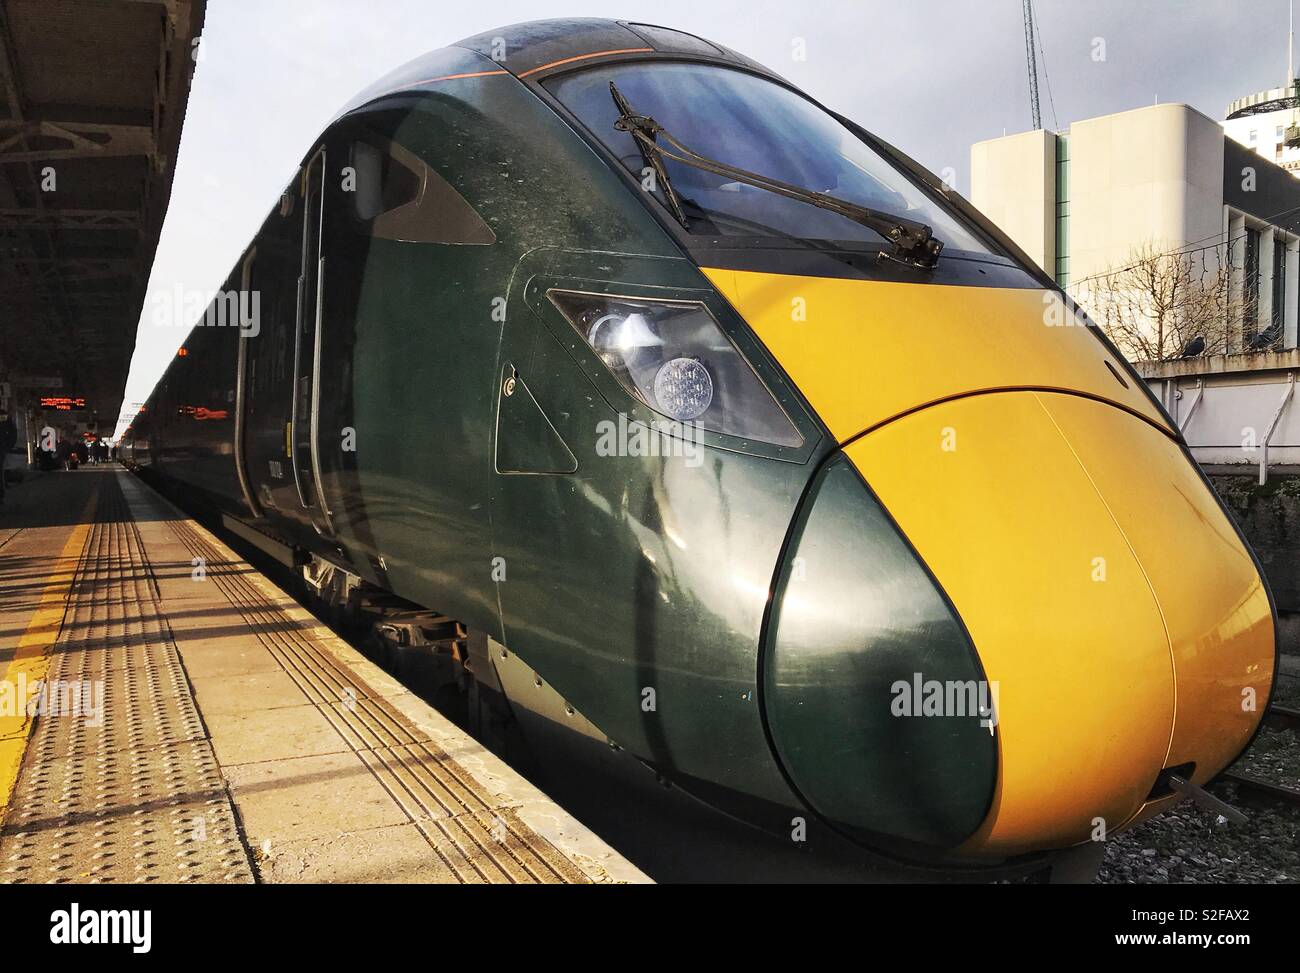 Great Western Railway electro-diesel high speed inter city express train Stock Photo